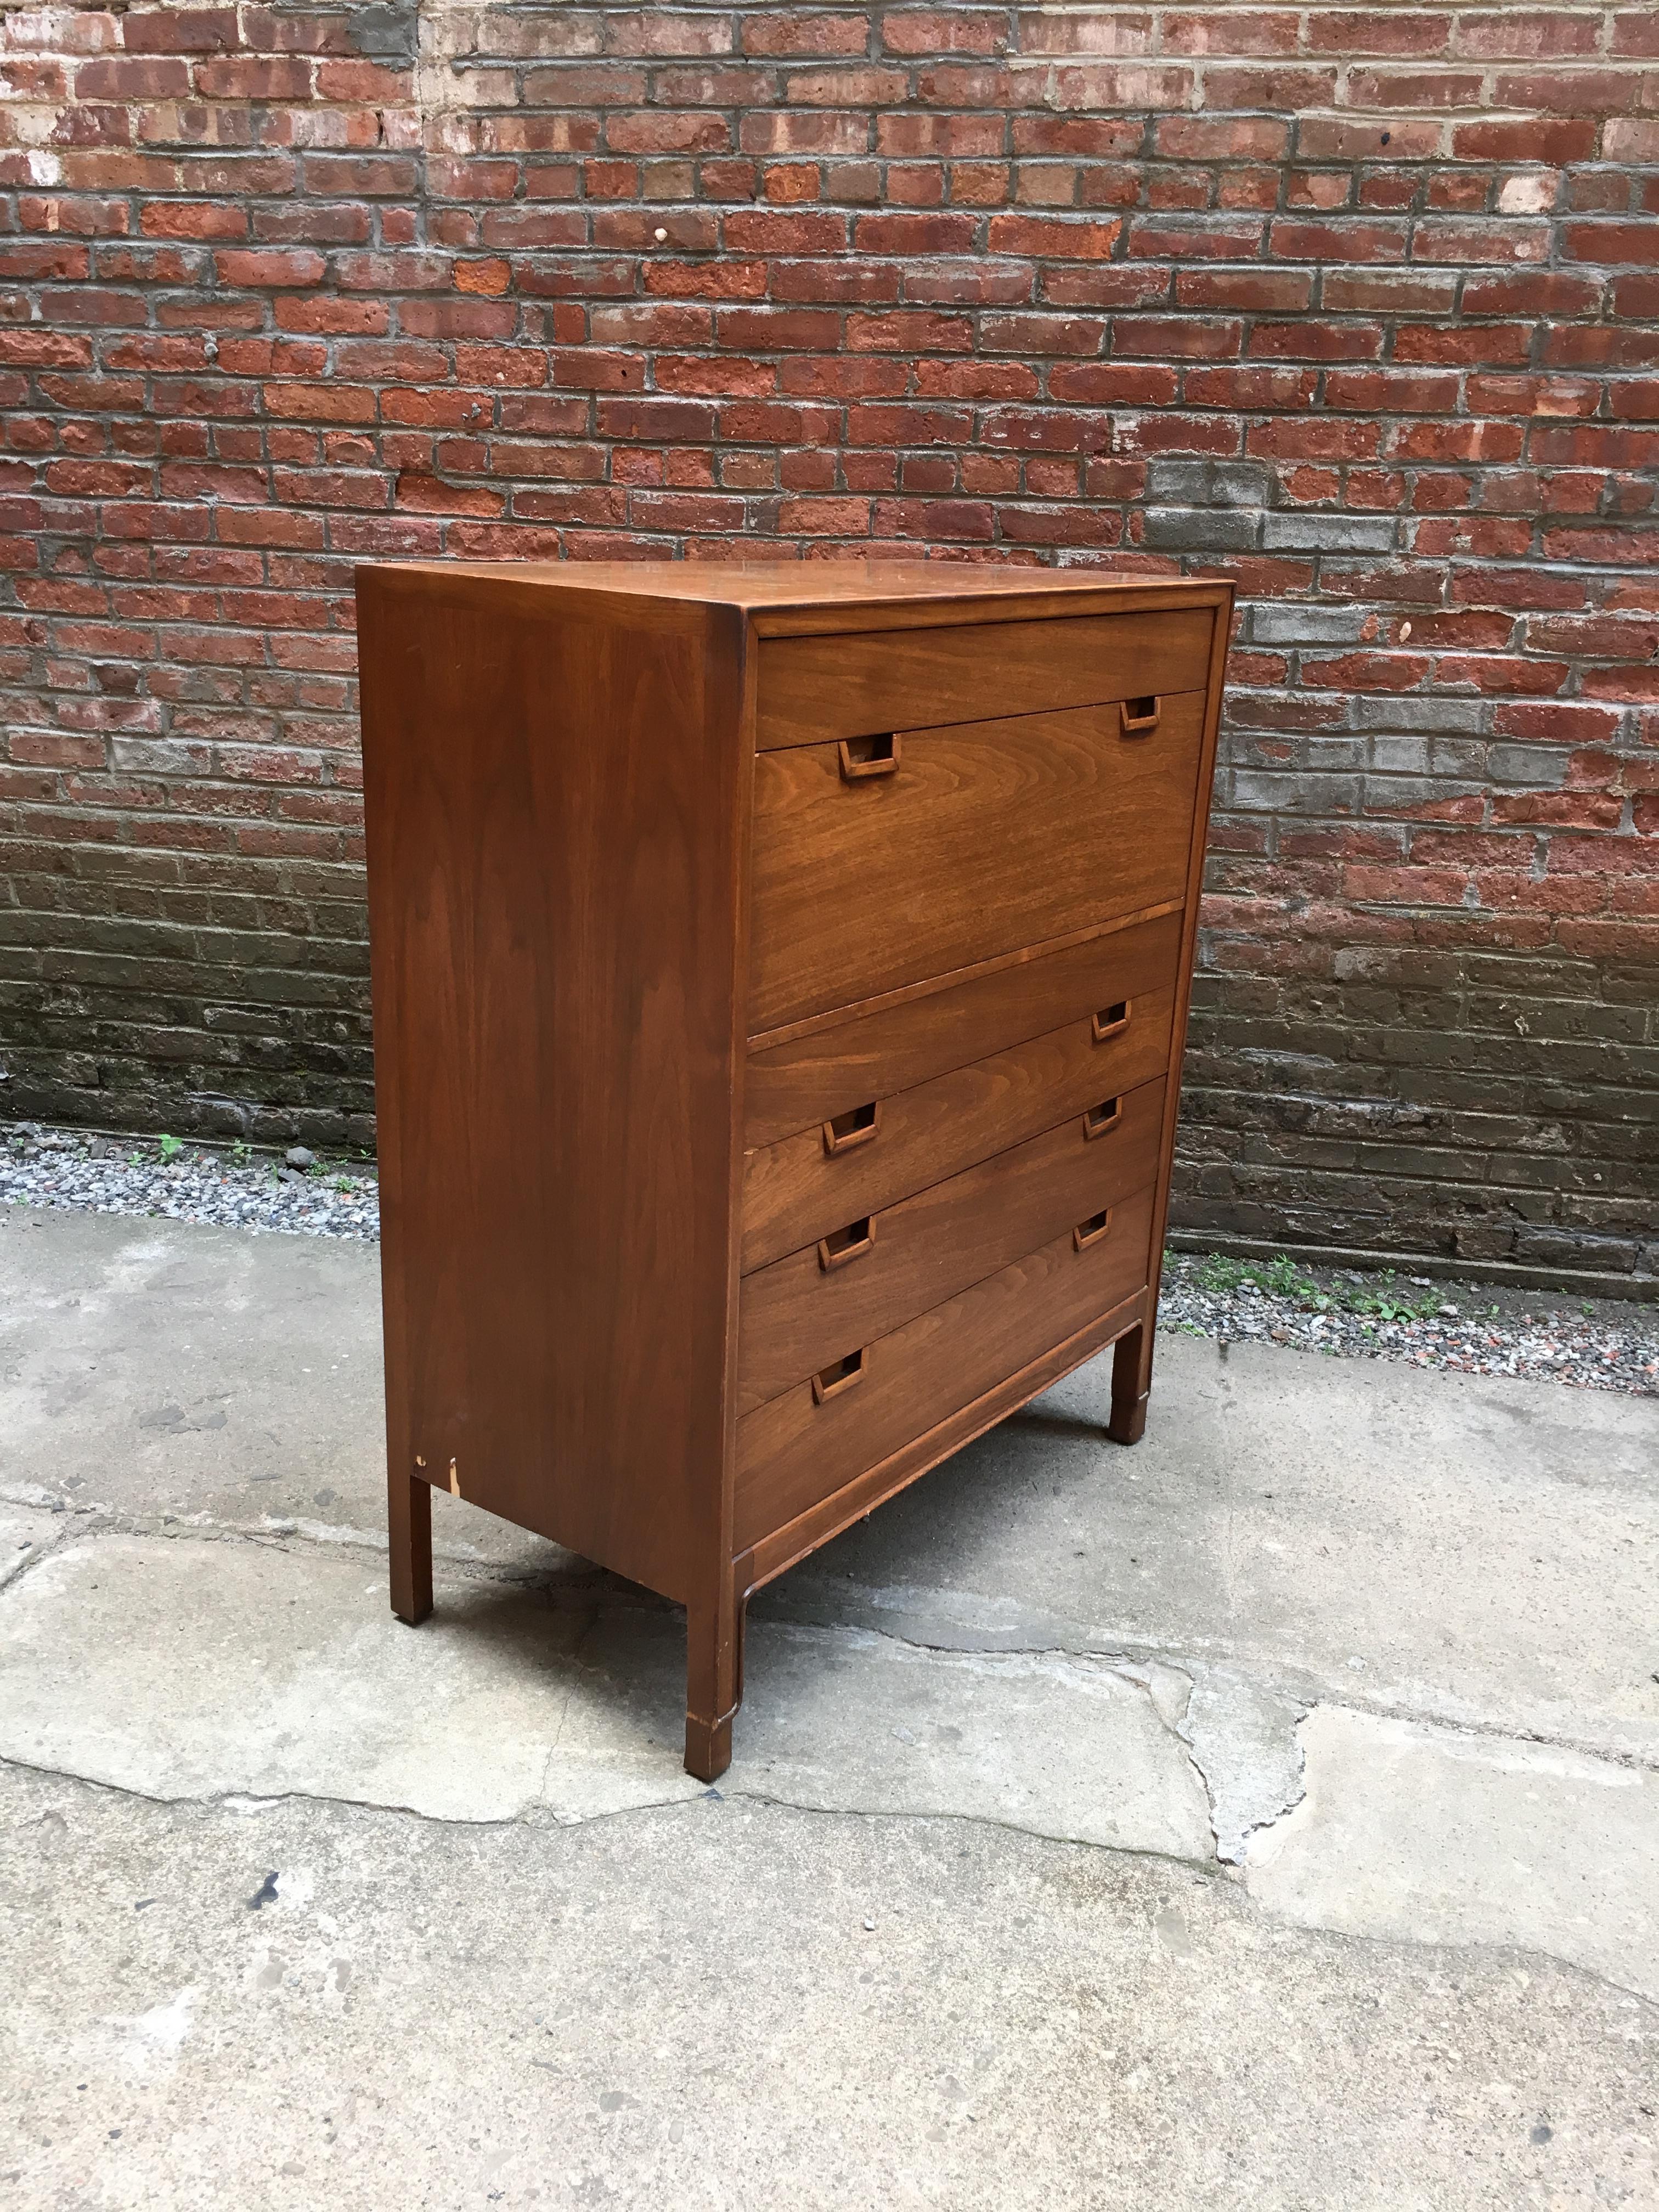 Beautiful solid and veneer walnut construction, circa 1955-1960. Six drawers on nicely carved legs. Banded veneer edge on top. Recessed handles. Oak secondary wood. Signed with burn in Janus stamp and John Stuart enamel button. Nice original